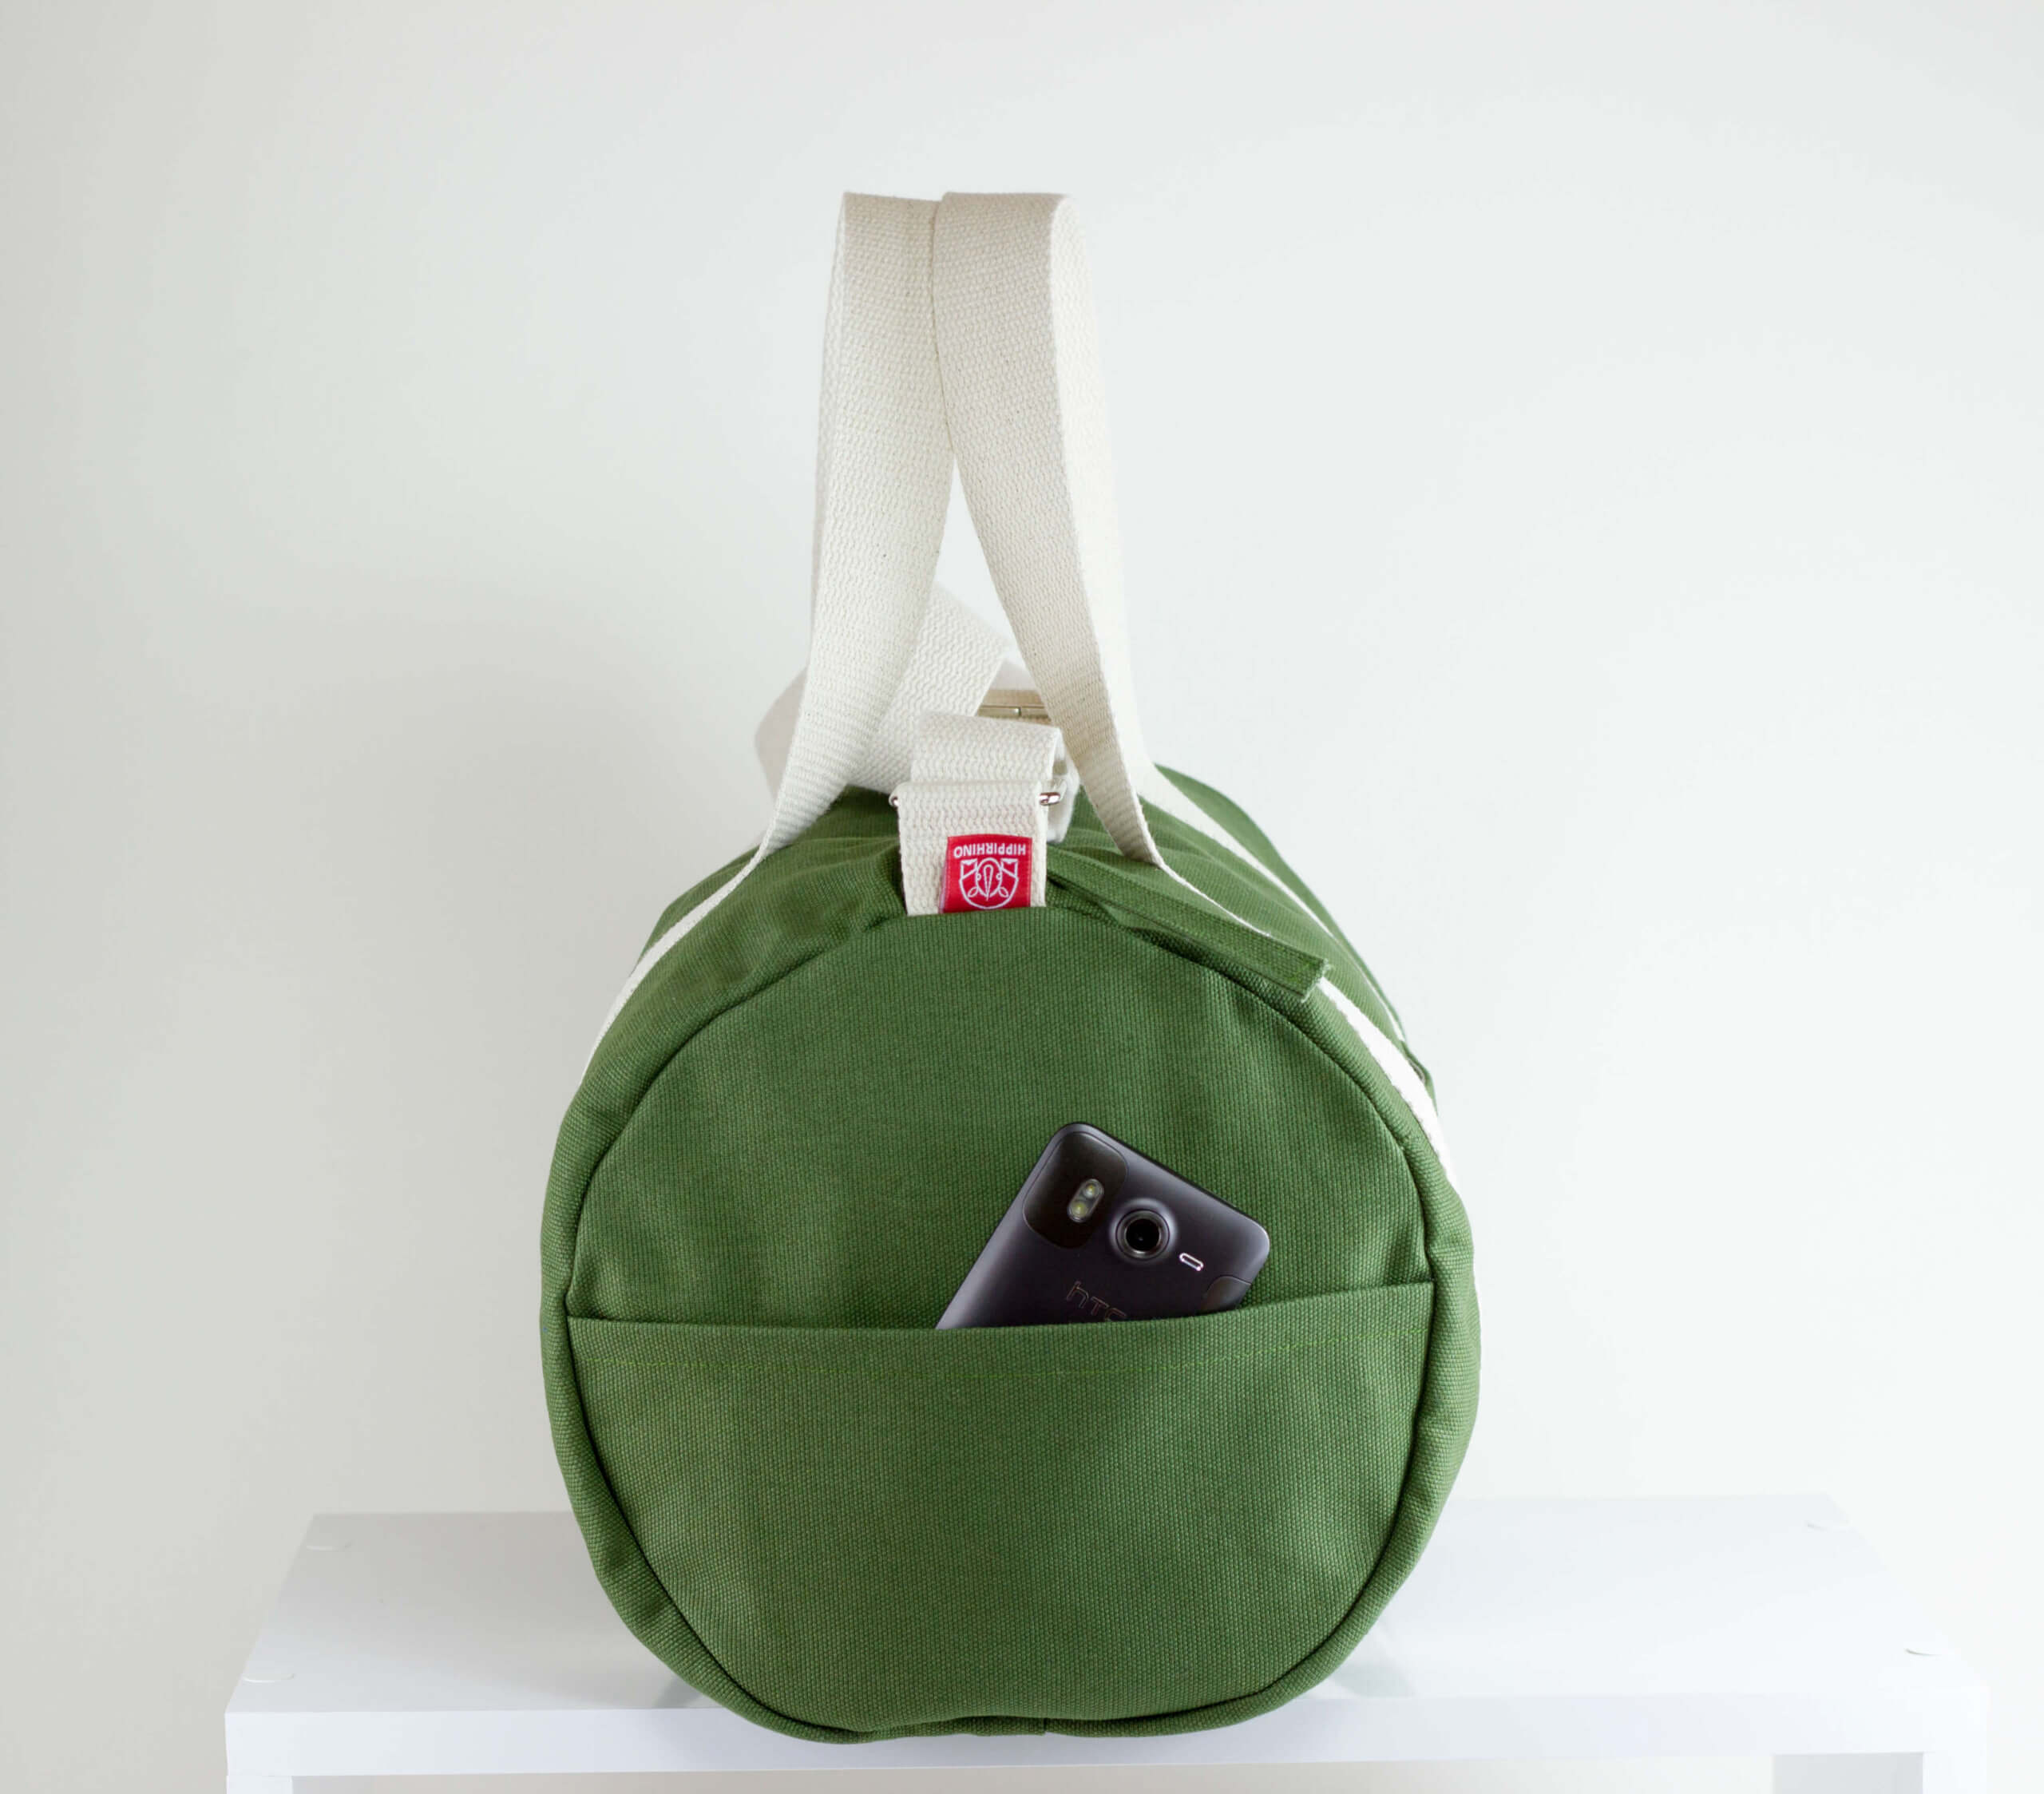 USJIANGM Mini Phone Bag with Wrinkle Design with Adjustable and Detachable Shoulder Straps for Spring Outing Autumn Outing Grass Green, Women's